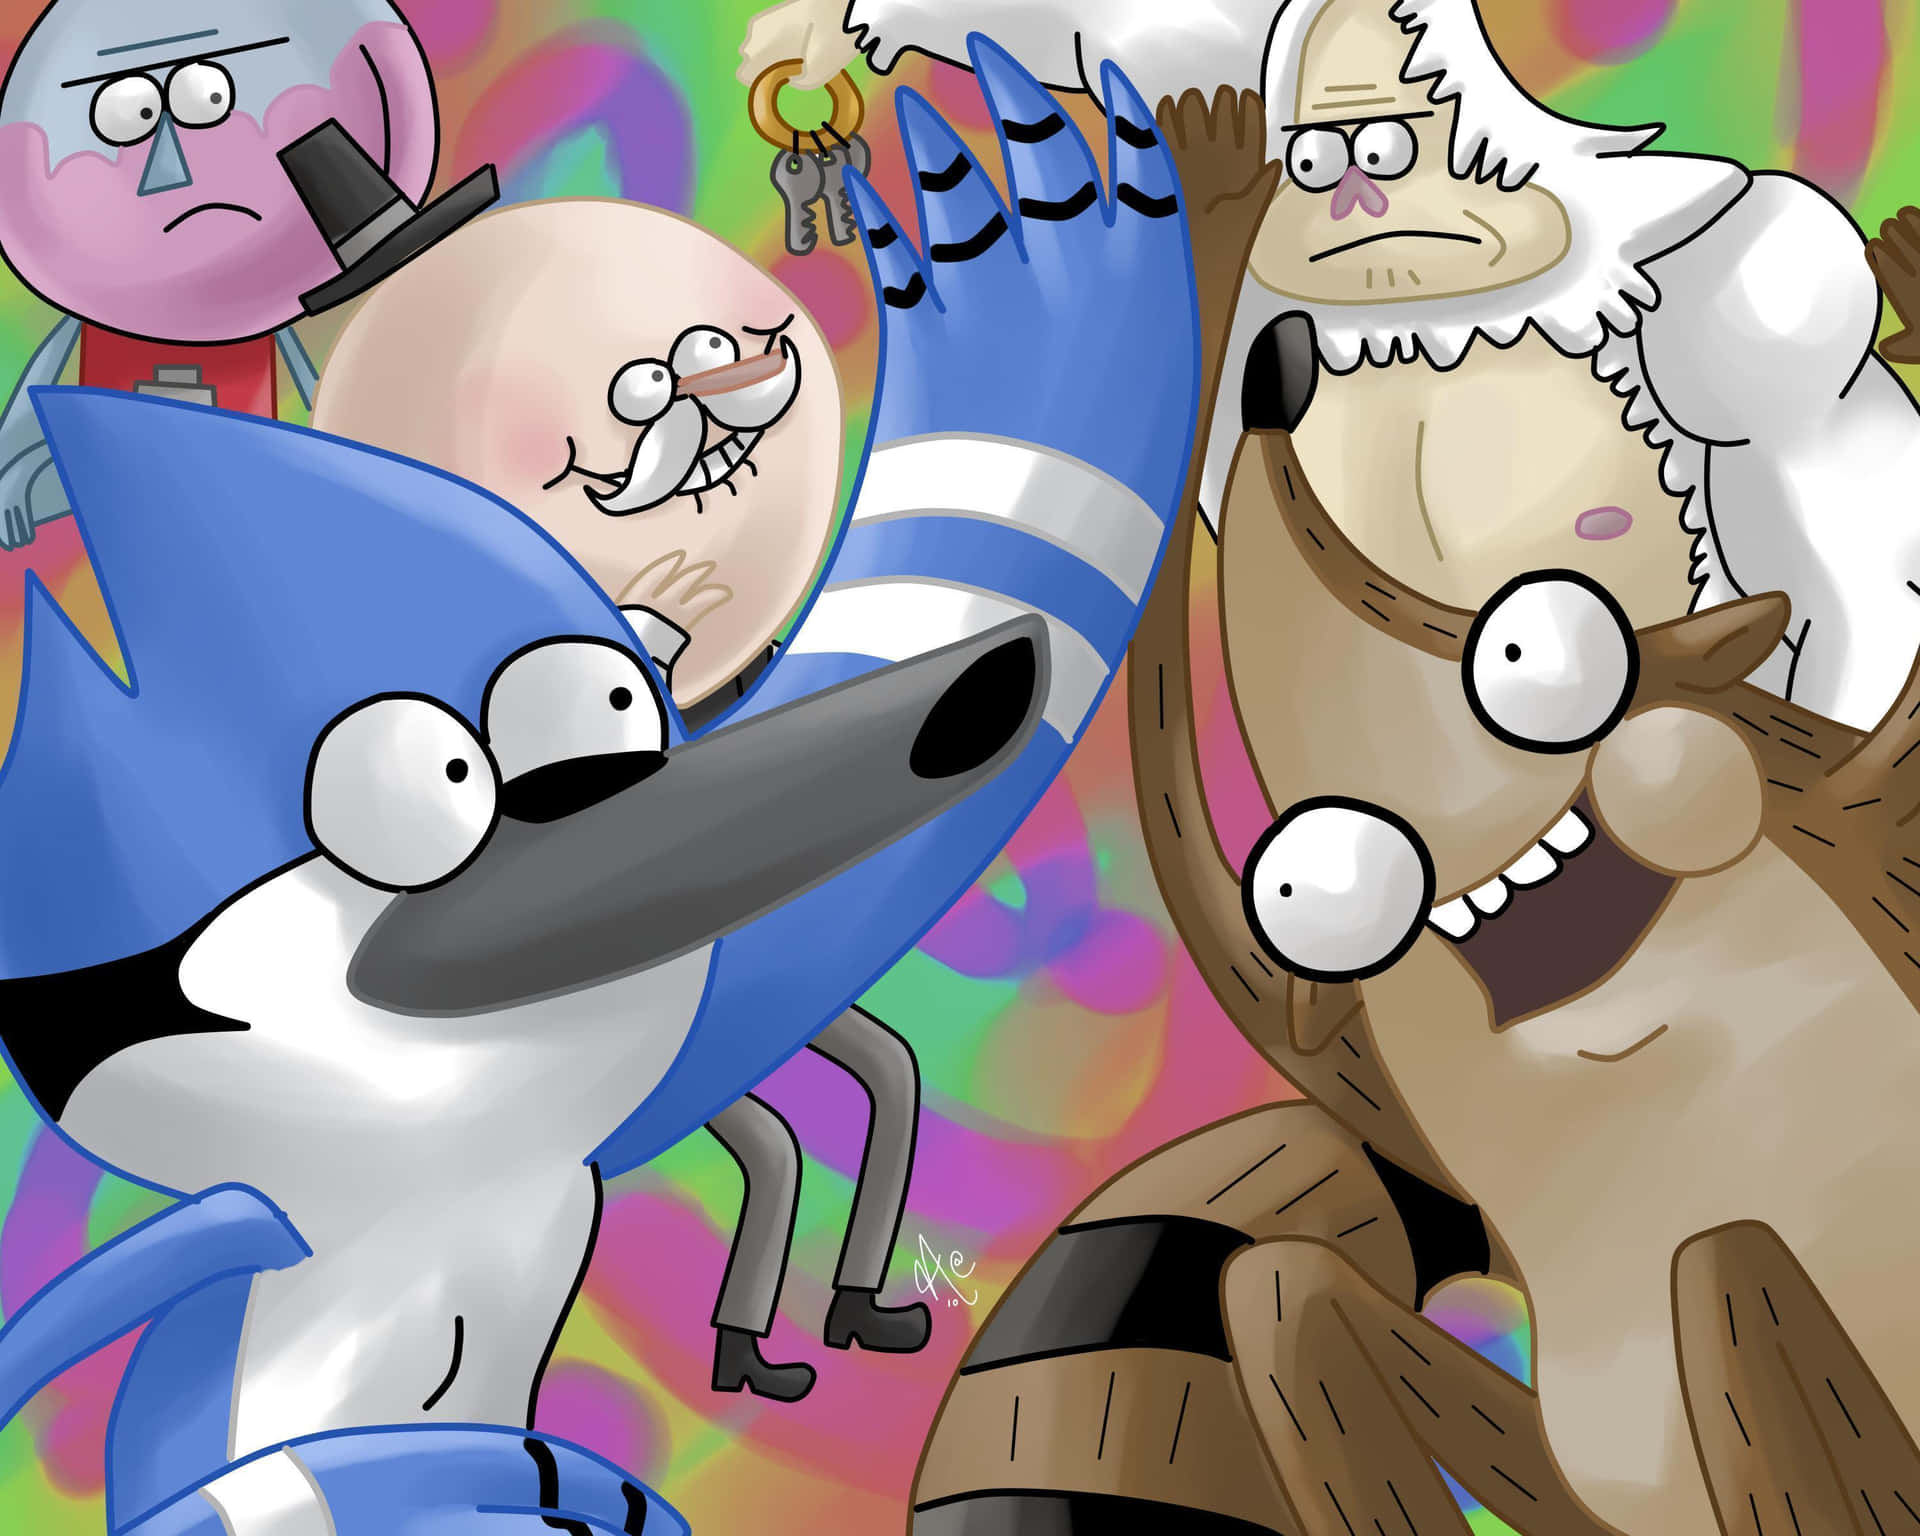 Mordecai and Rigby's Adventure in Regular Show